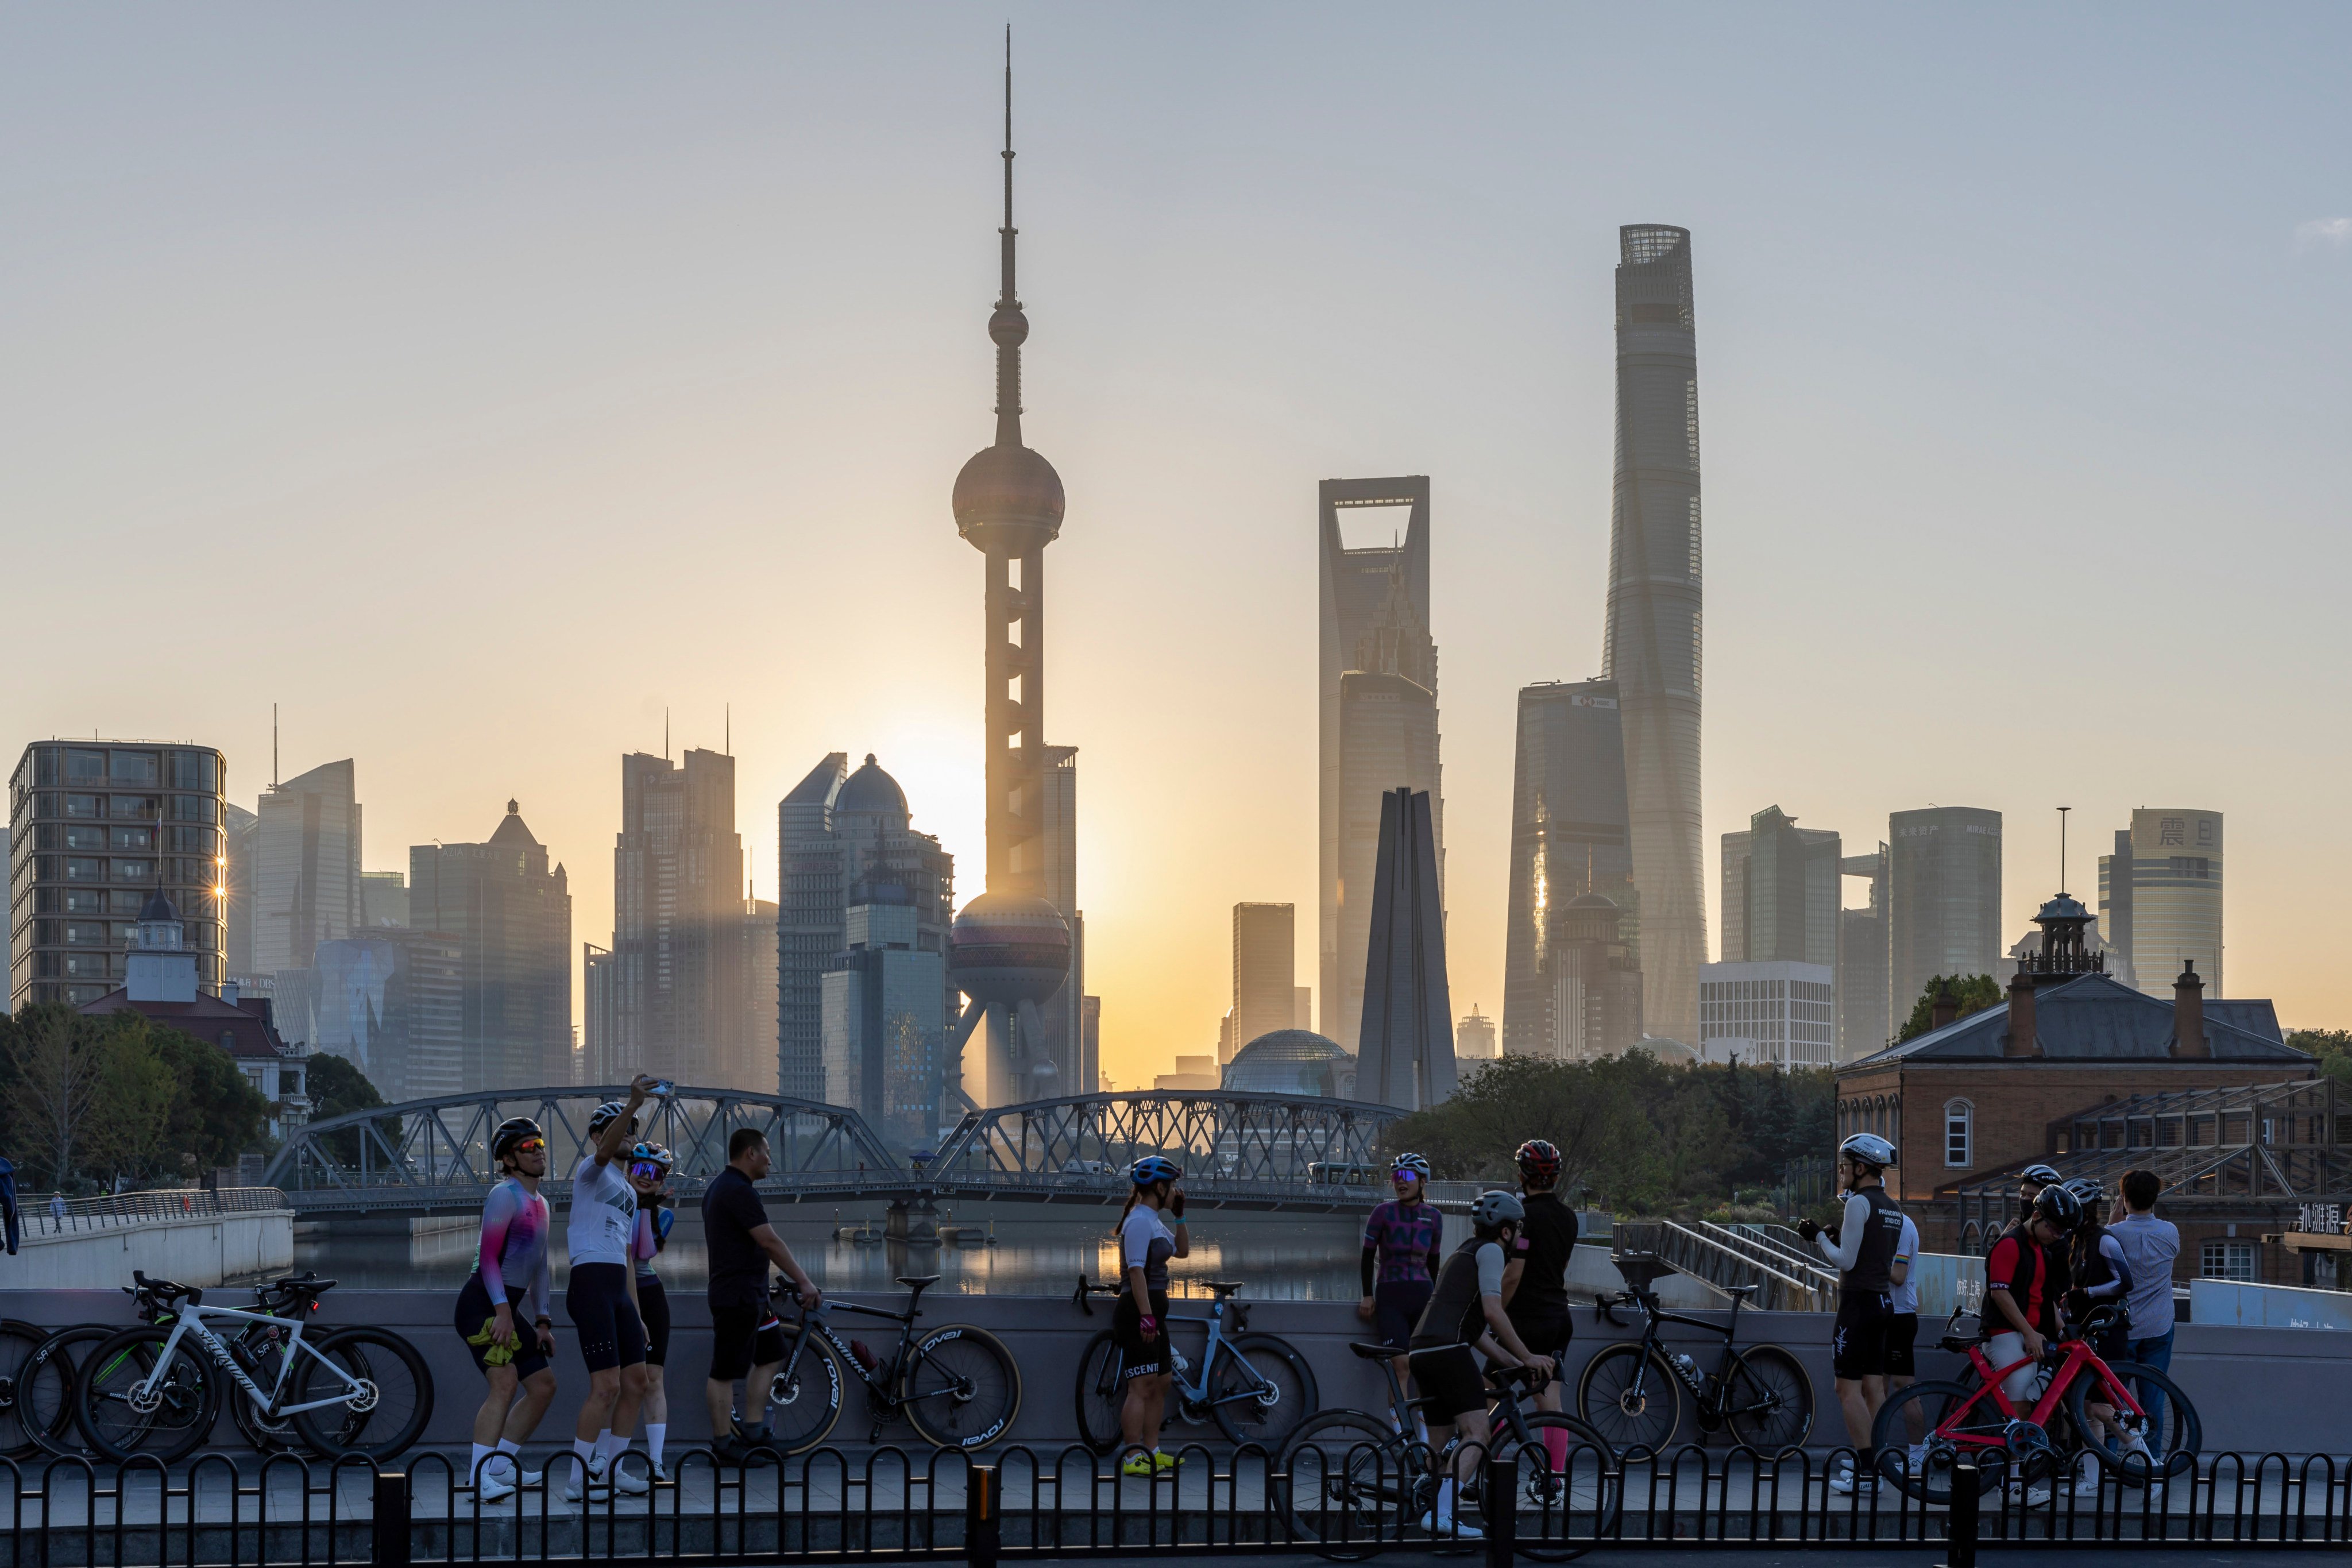 The city’s accelerated efforts to bolster technological innovation will consolidate its role as an investment magnet, Shanghai’s mayor says. Photo: AP